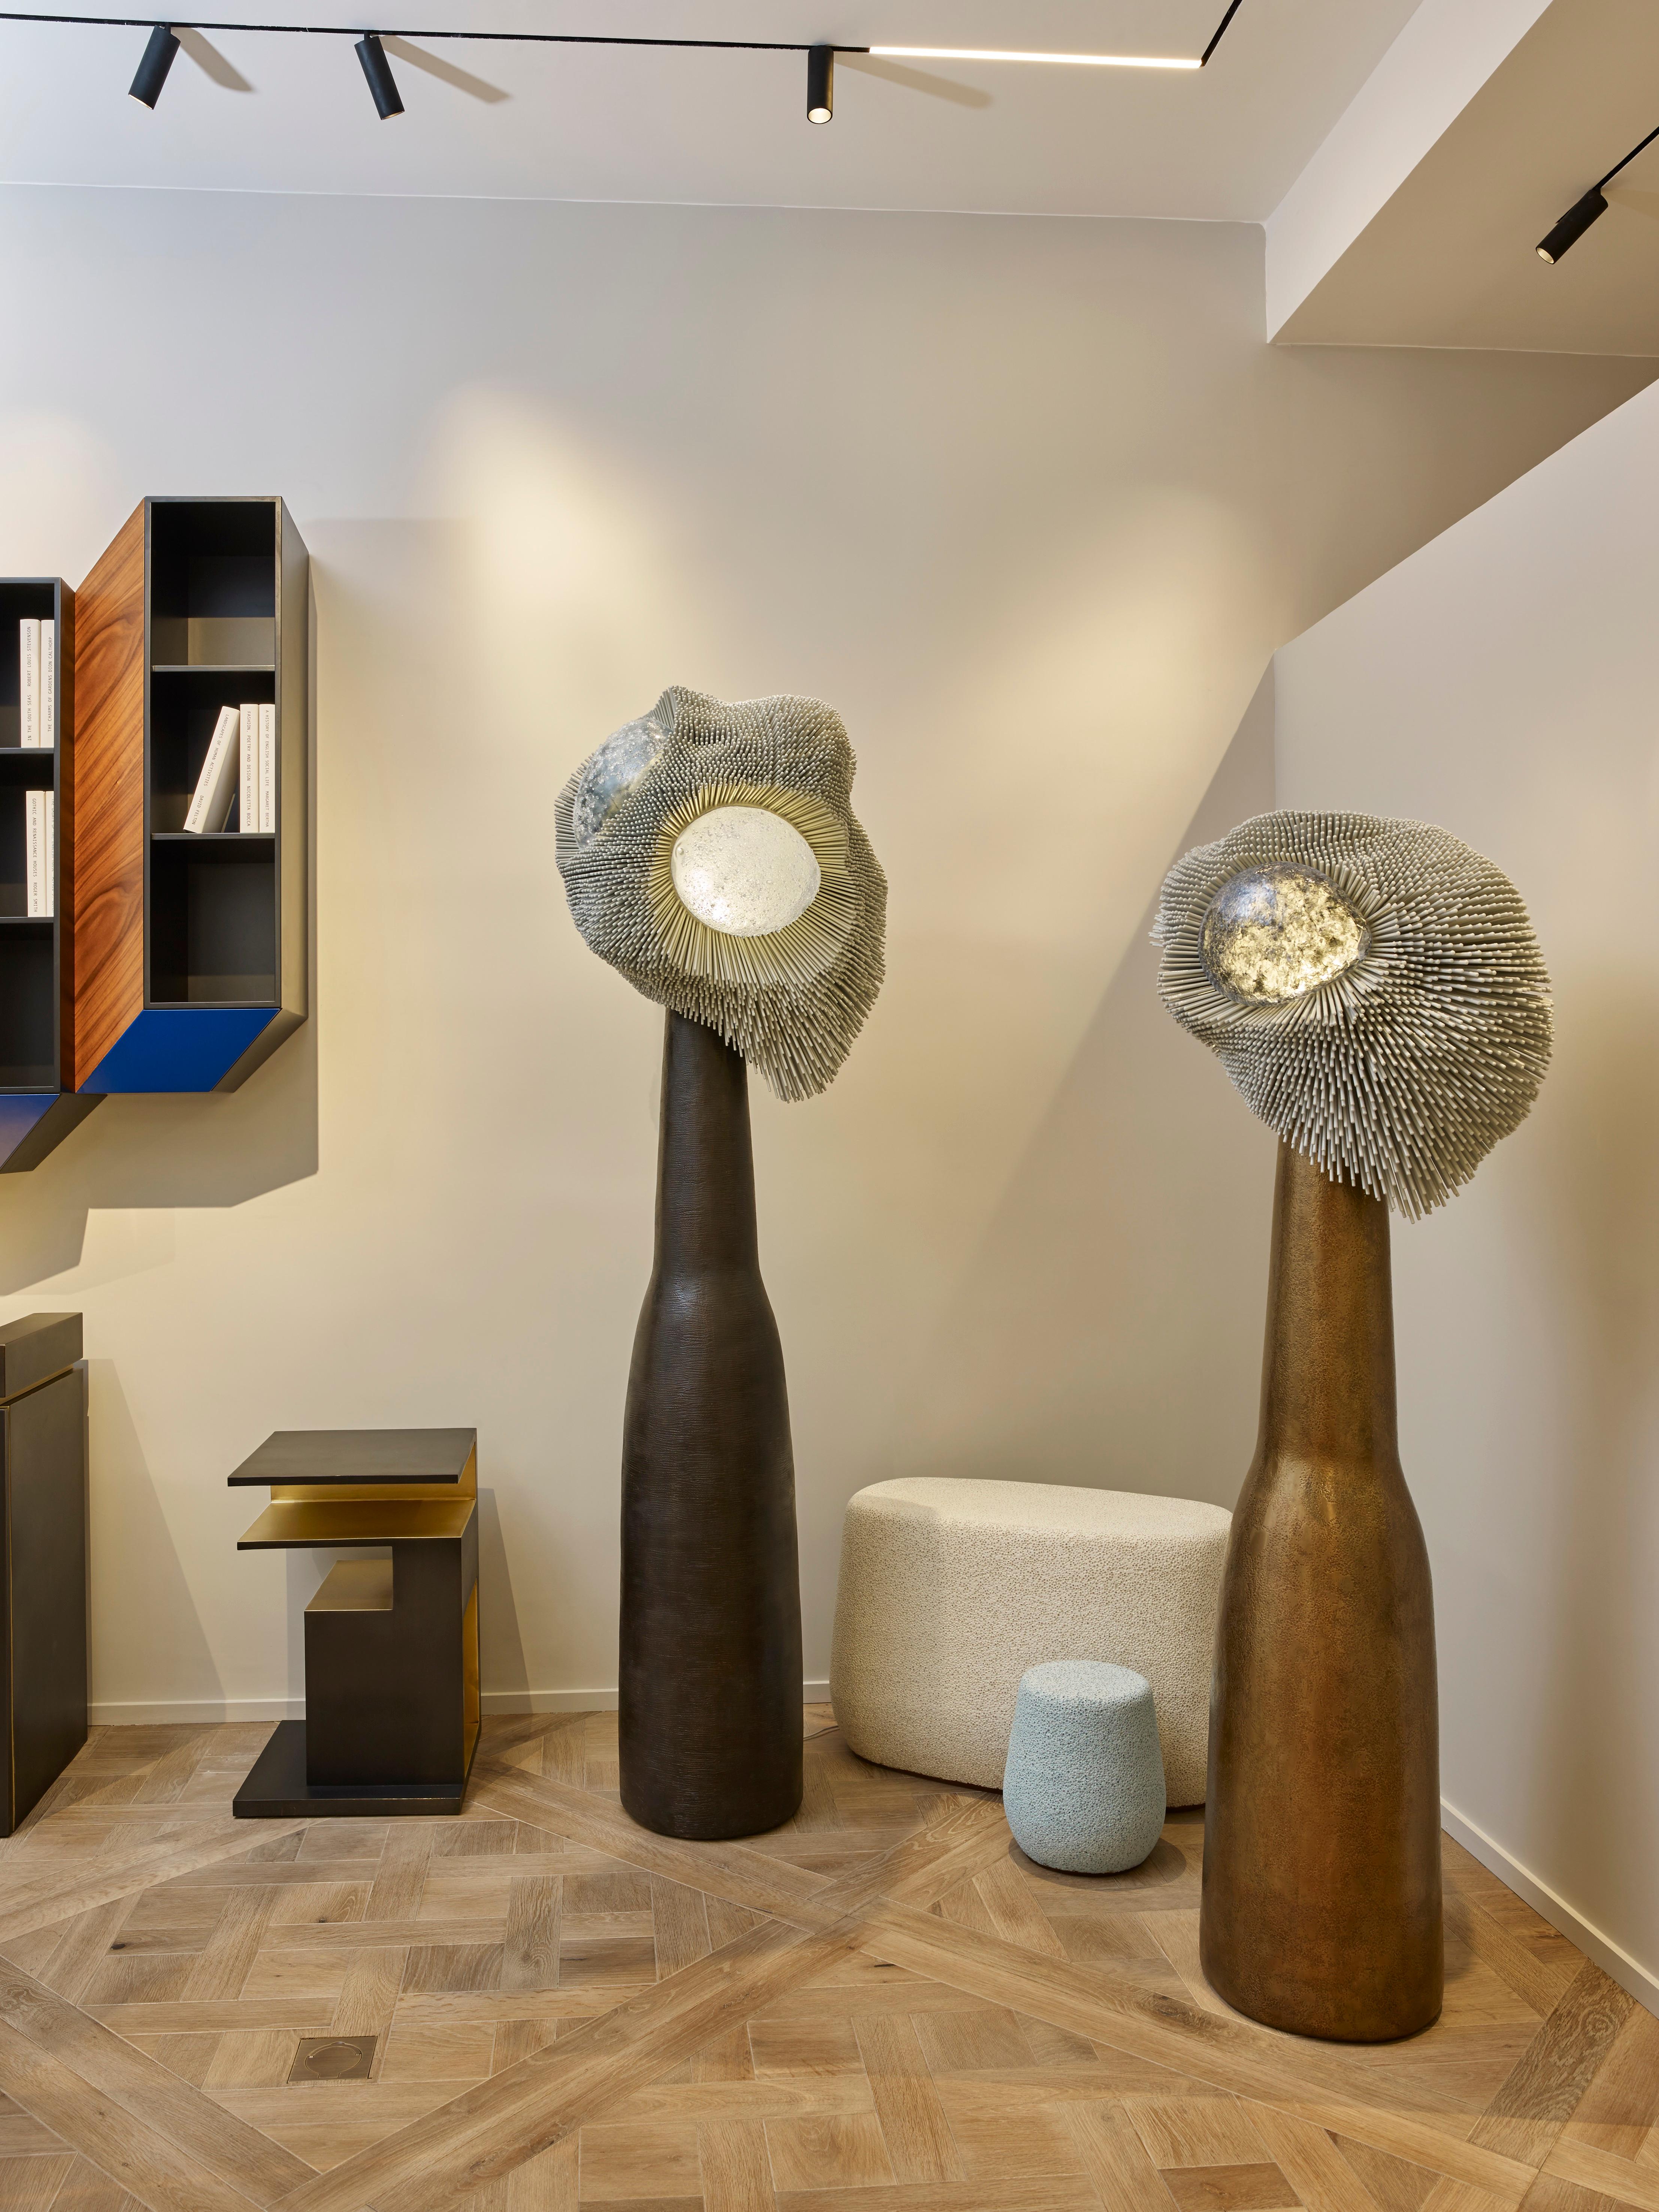 Hammered 'Sea Anemones' Floor Lamps by Pia Maria Raeder